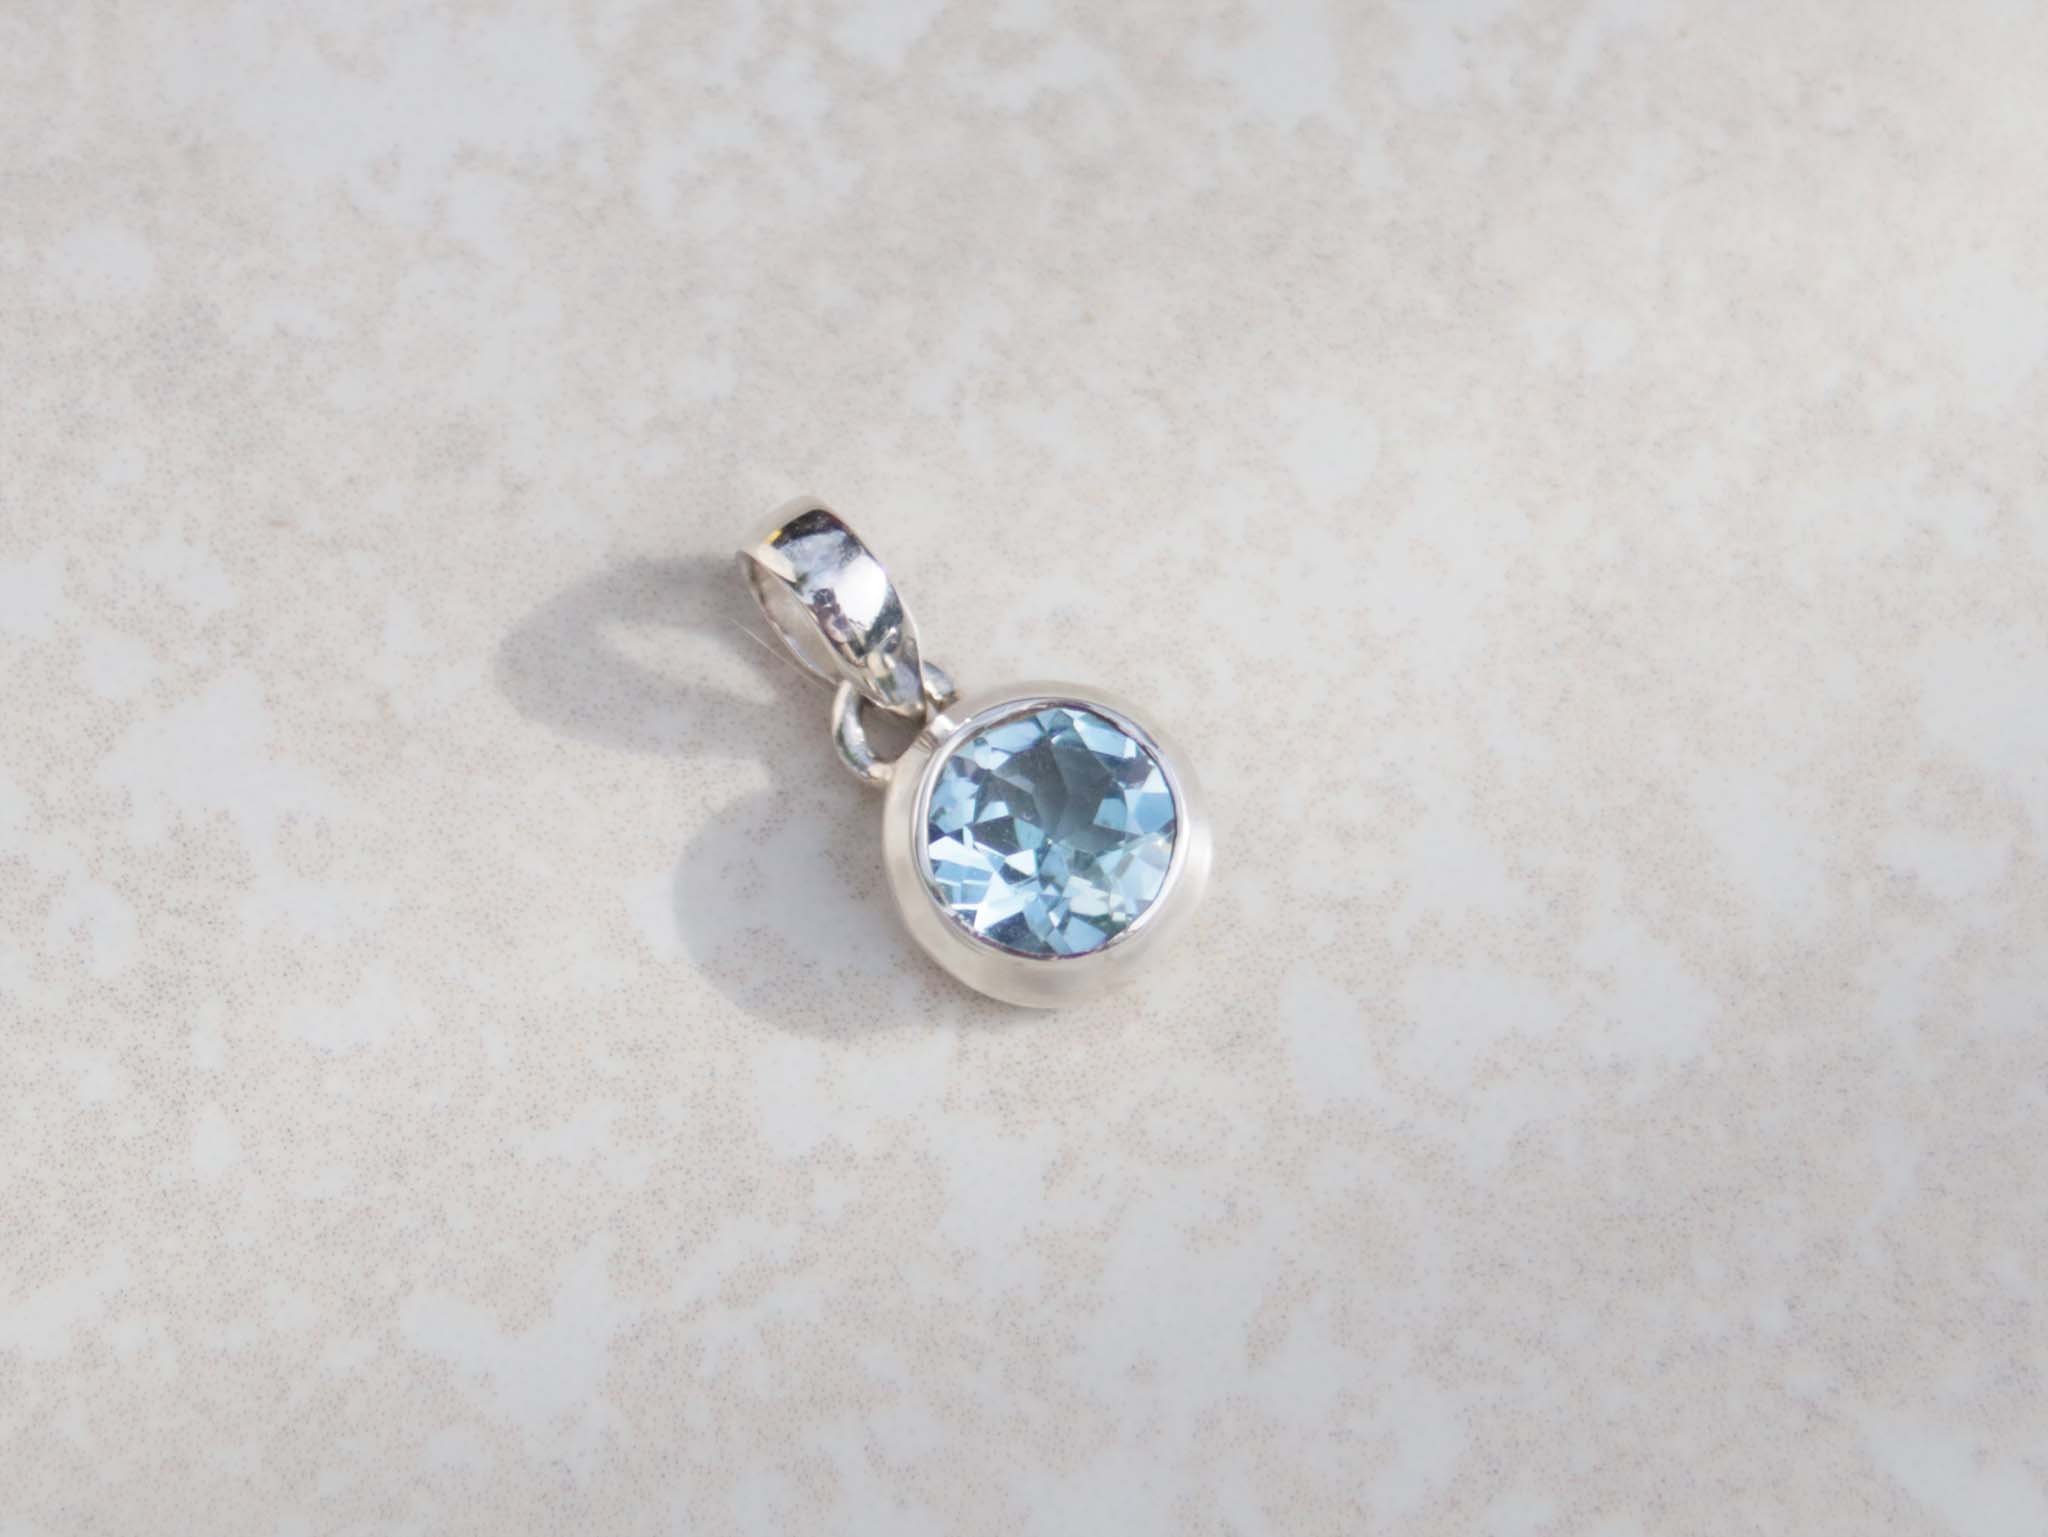 This round pendant features an aquamarine and sterling silver. Dressed with a dainty silver chain, this gem stands out for its vivid sky blue colour and brilliance. 